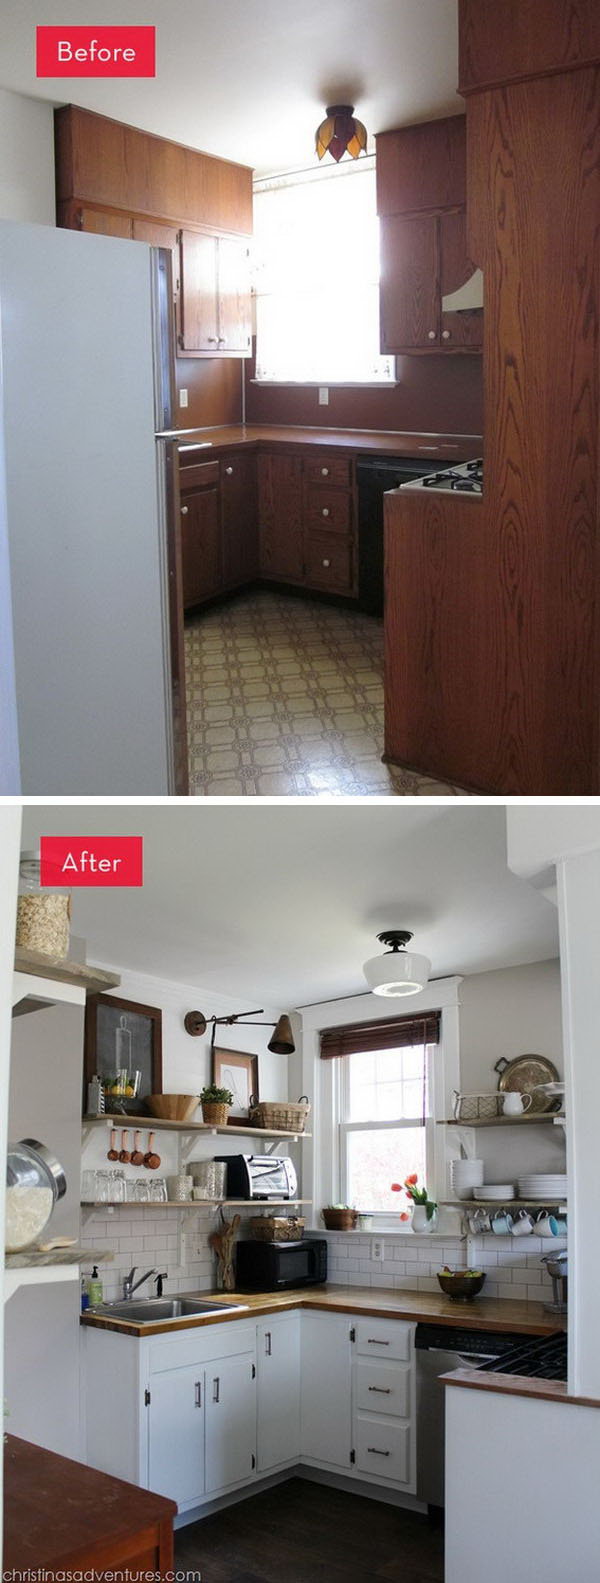 Before and After: A Dark Kitchen Gets A Refreshing New Look. What an amazing improvement. This kitchen was dark and dingy with the brown cabinets and backsplash. But now it's light filled, airy and inviting. 